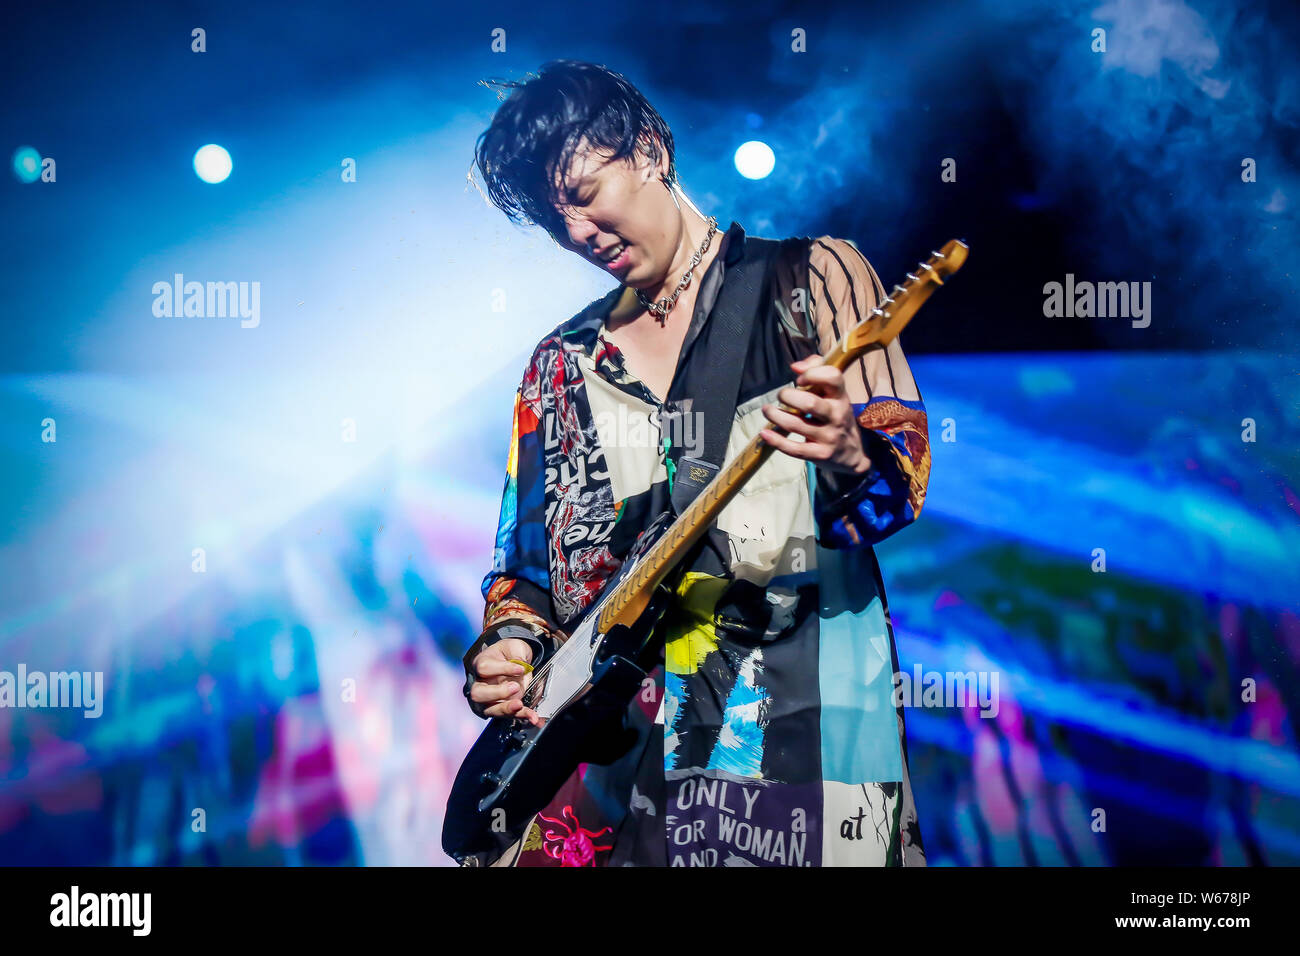 Members Of Japanese Rock Band Radwimps Perform During Radwimps Asia Live Tour 18 Concert In Shanghai China 11 July 18 Stock Photo Alamy